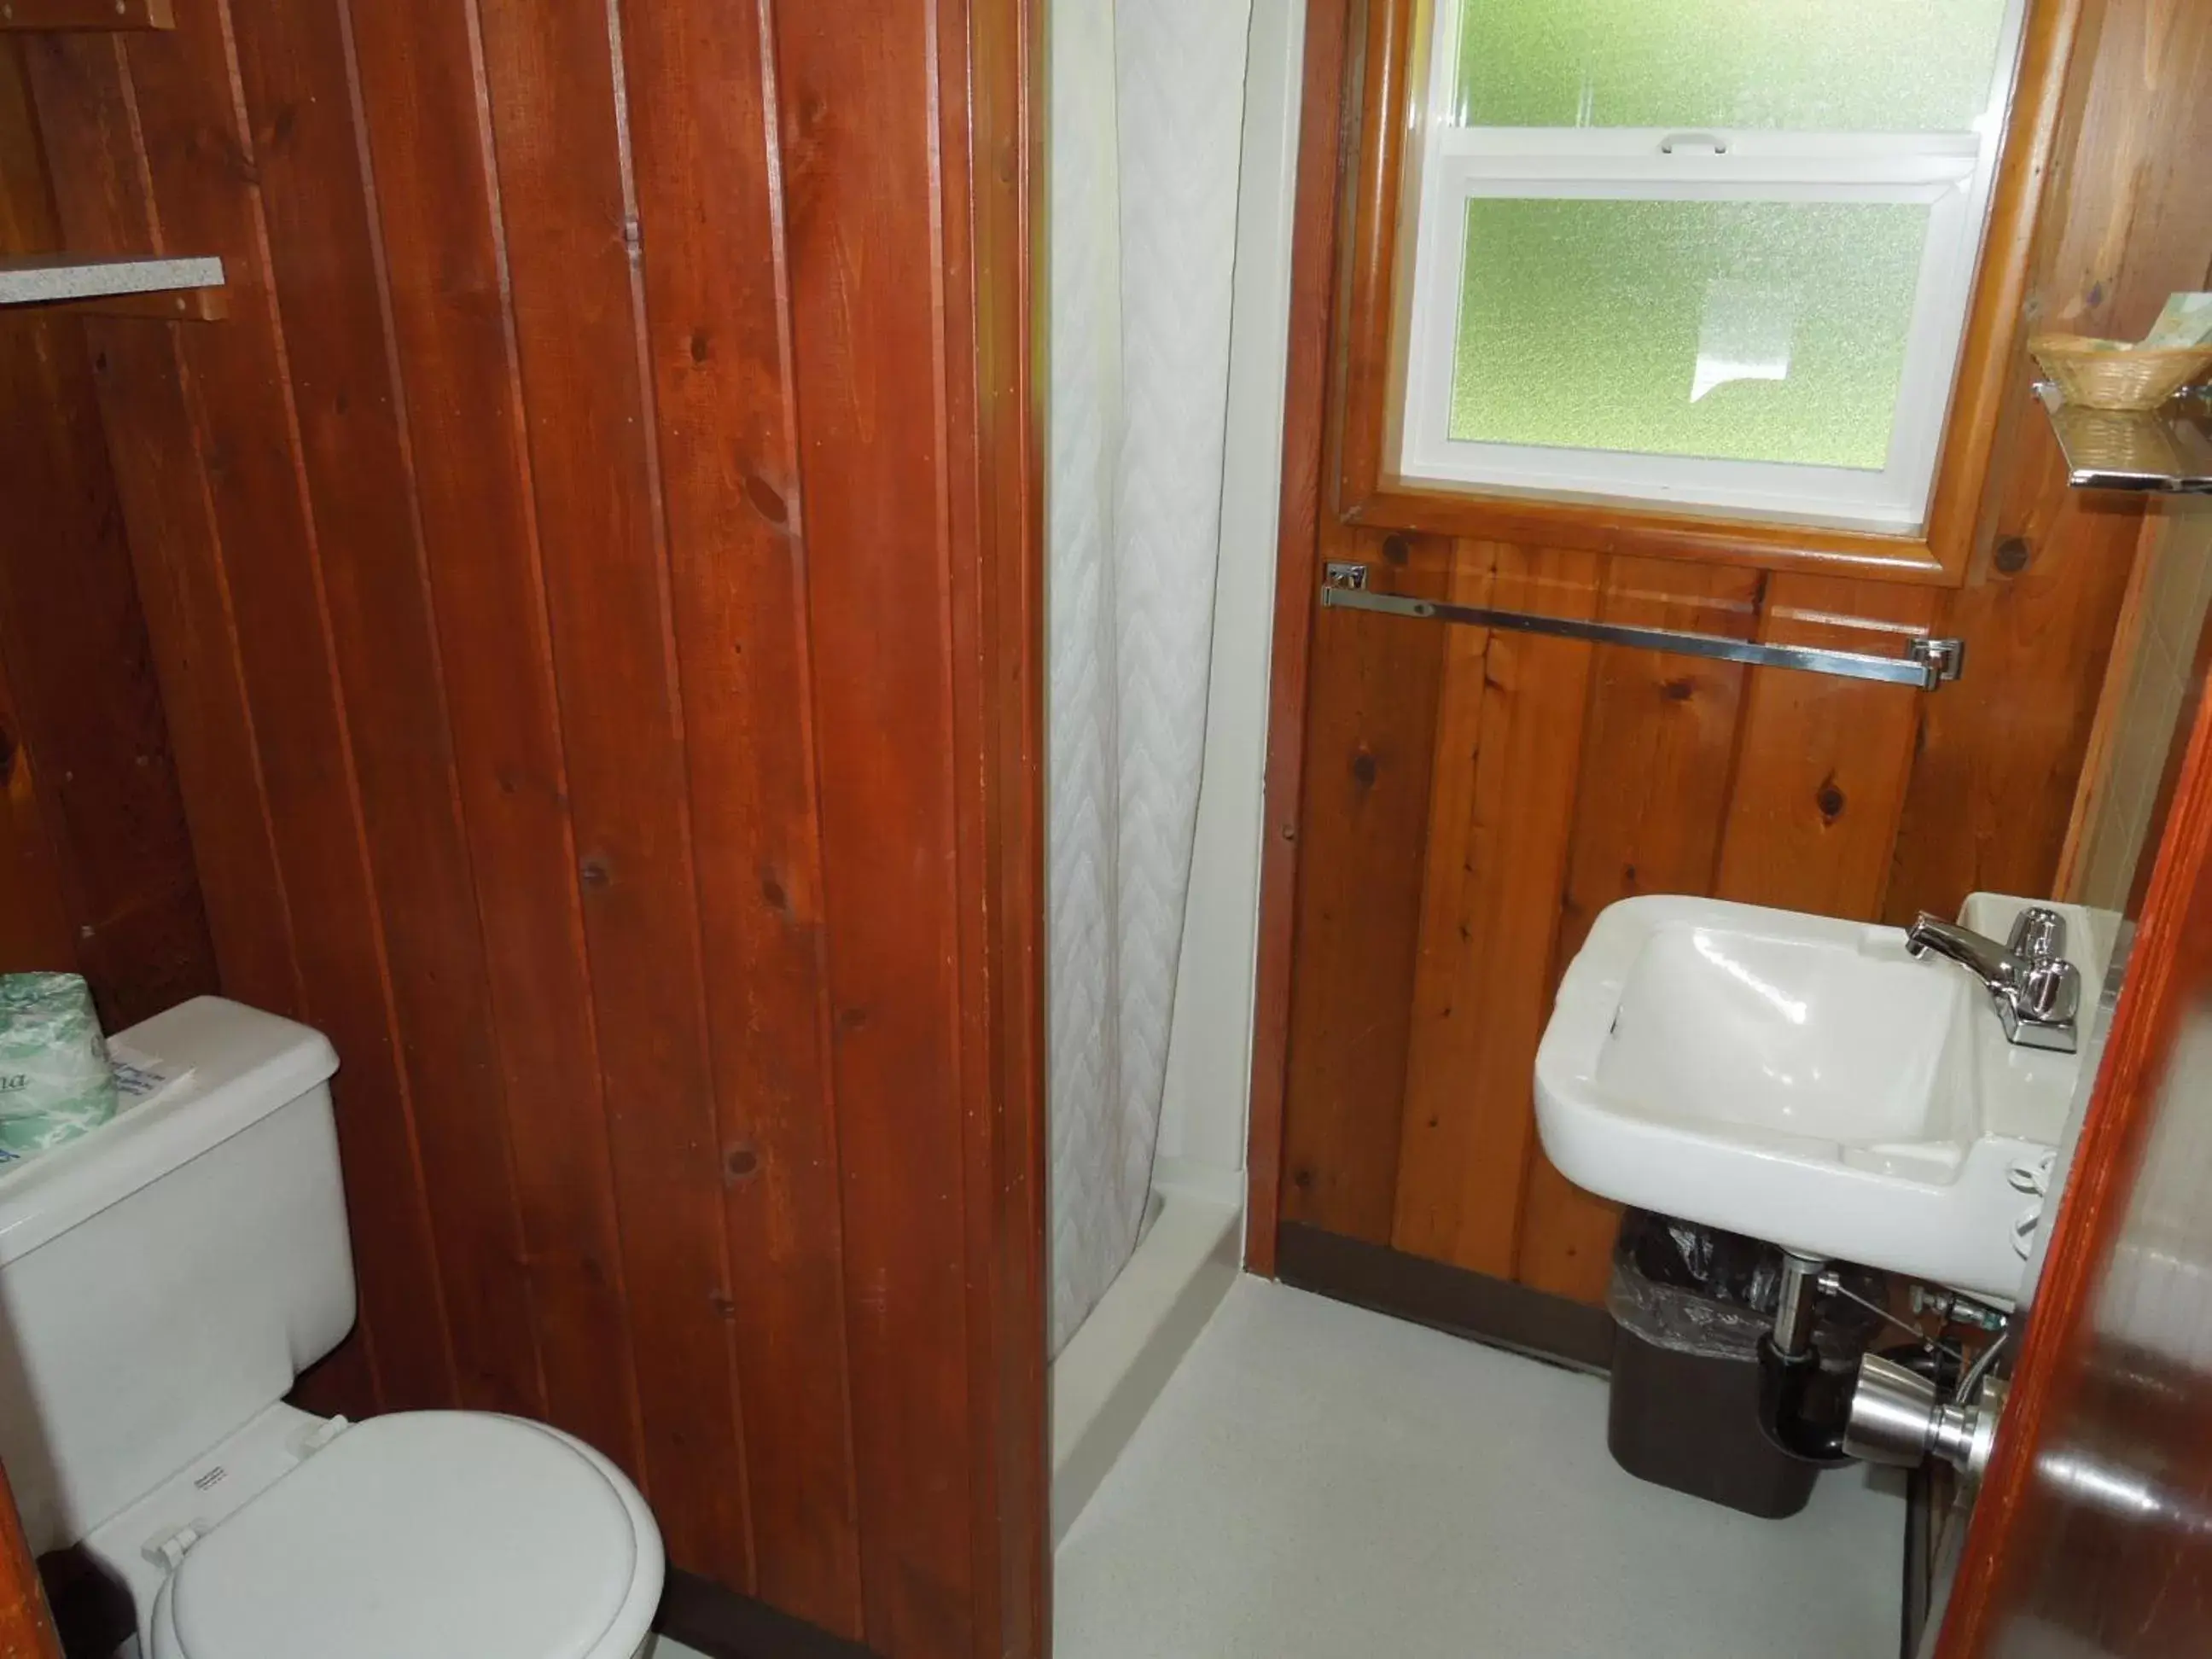 Bathroom in Park Motel and Cabins